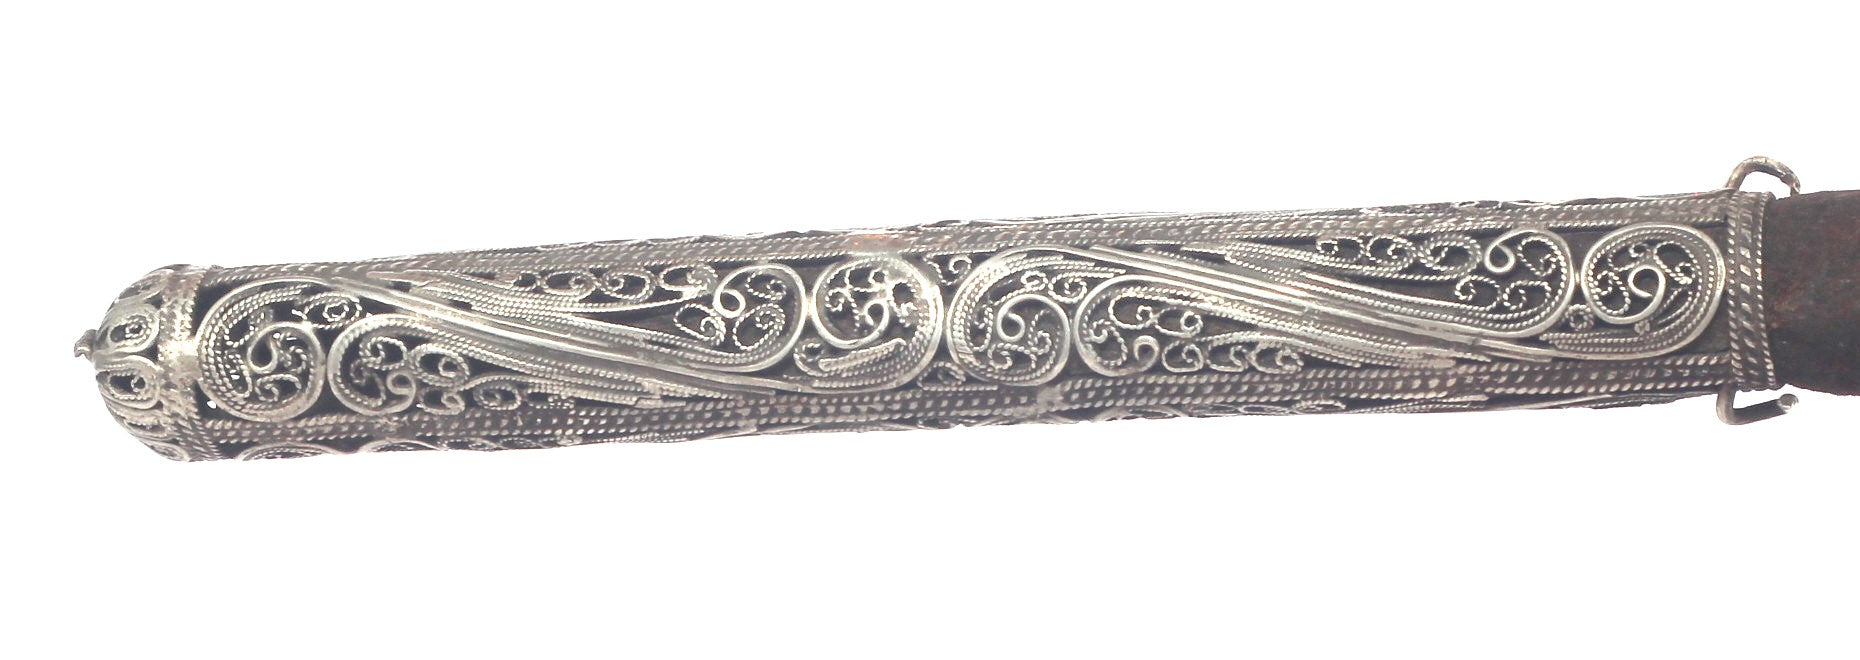 Antique hide whip with silver filigree